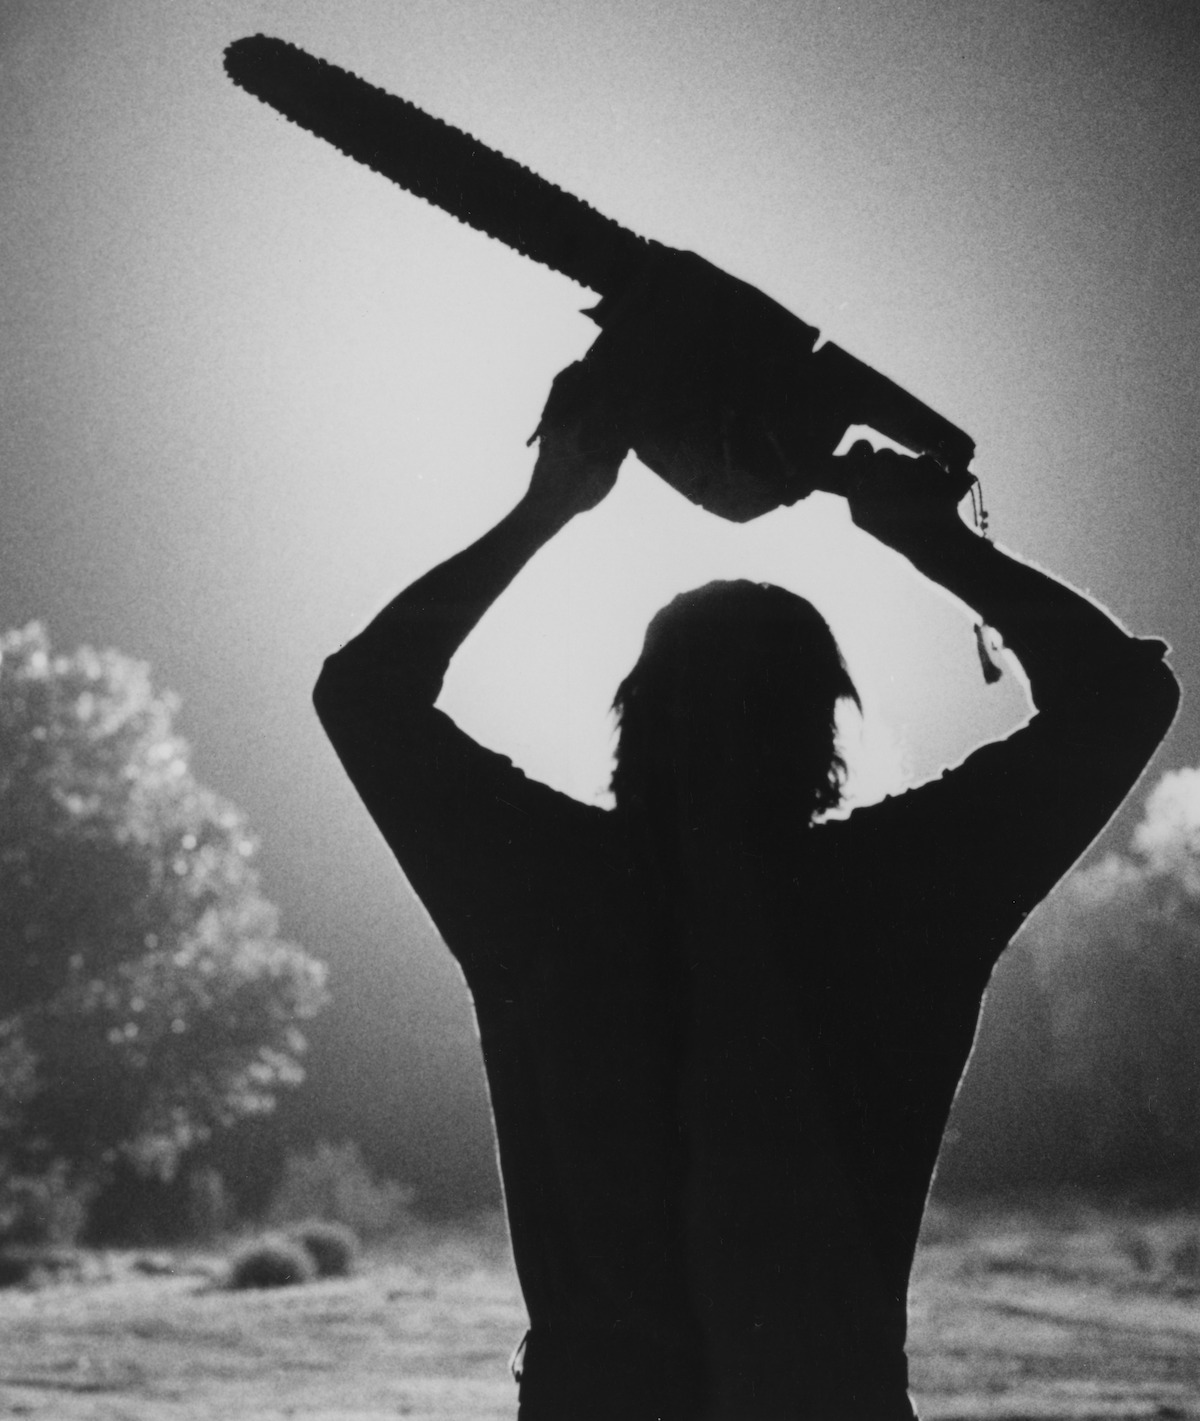 Leatherface returns in extreme trailer for new Texas Chainsaw Massacre